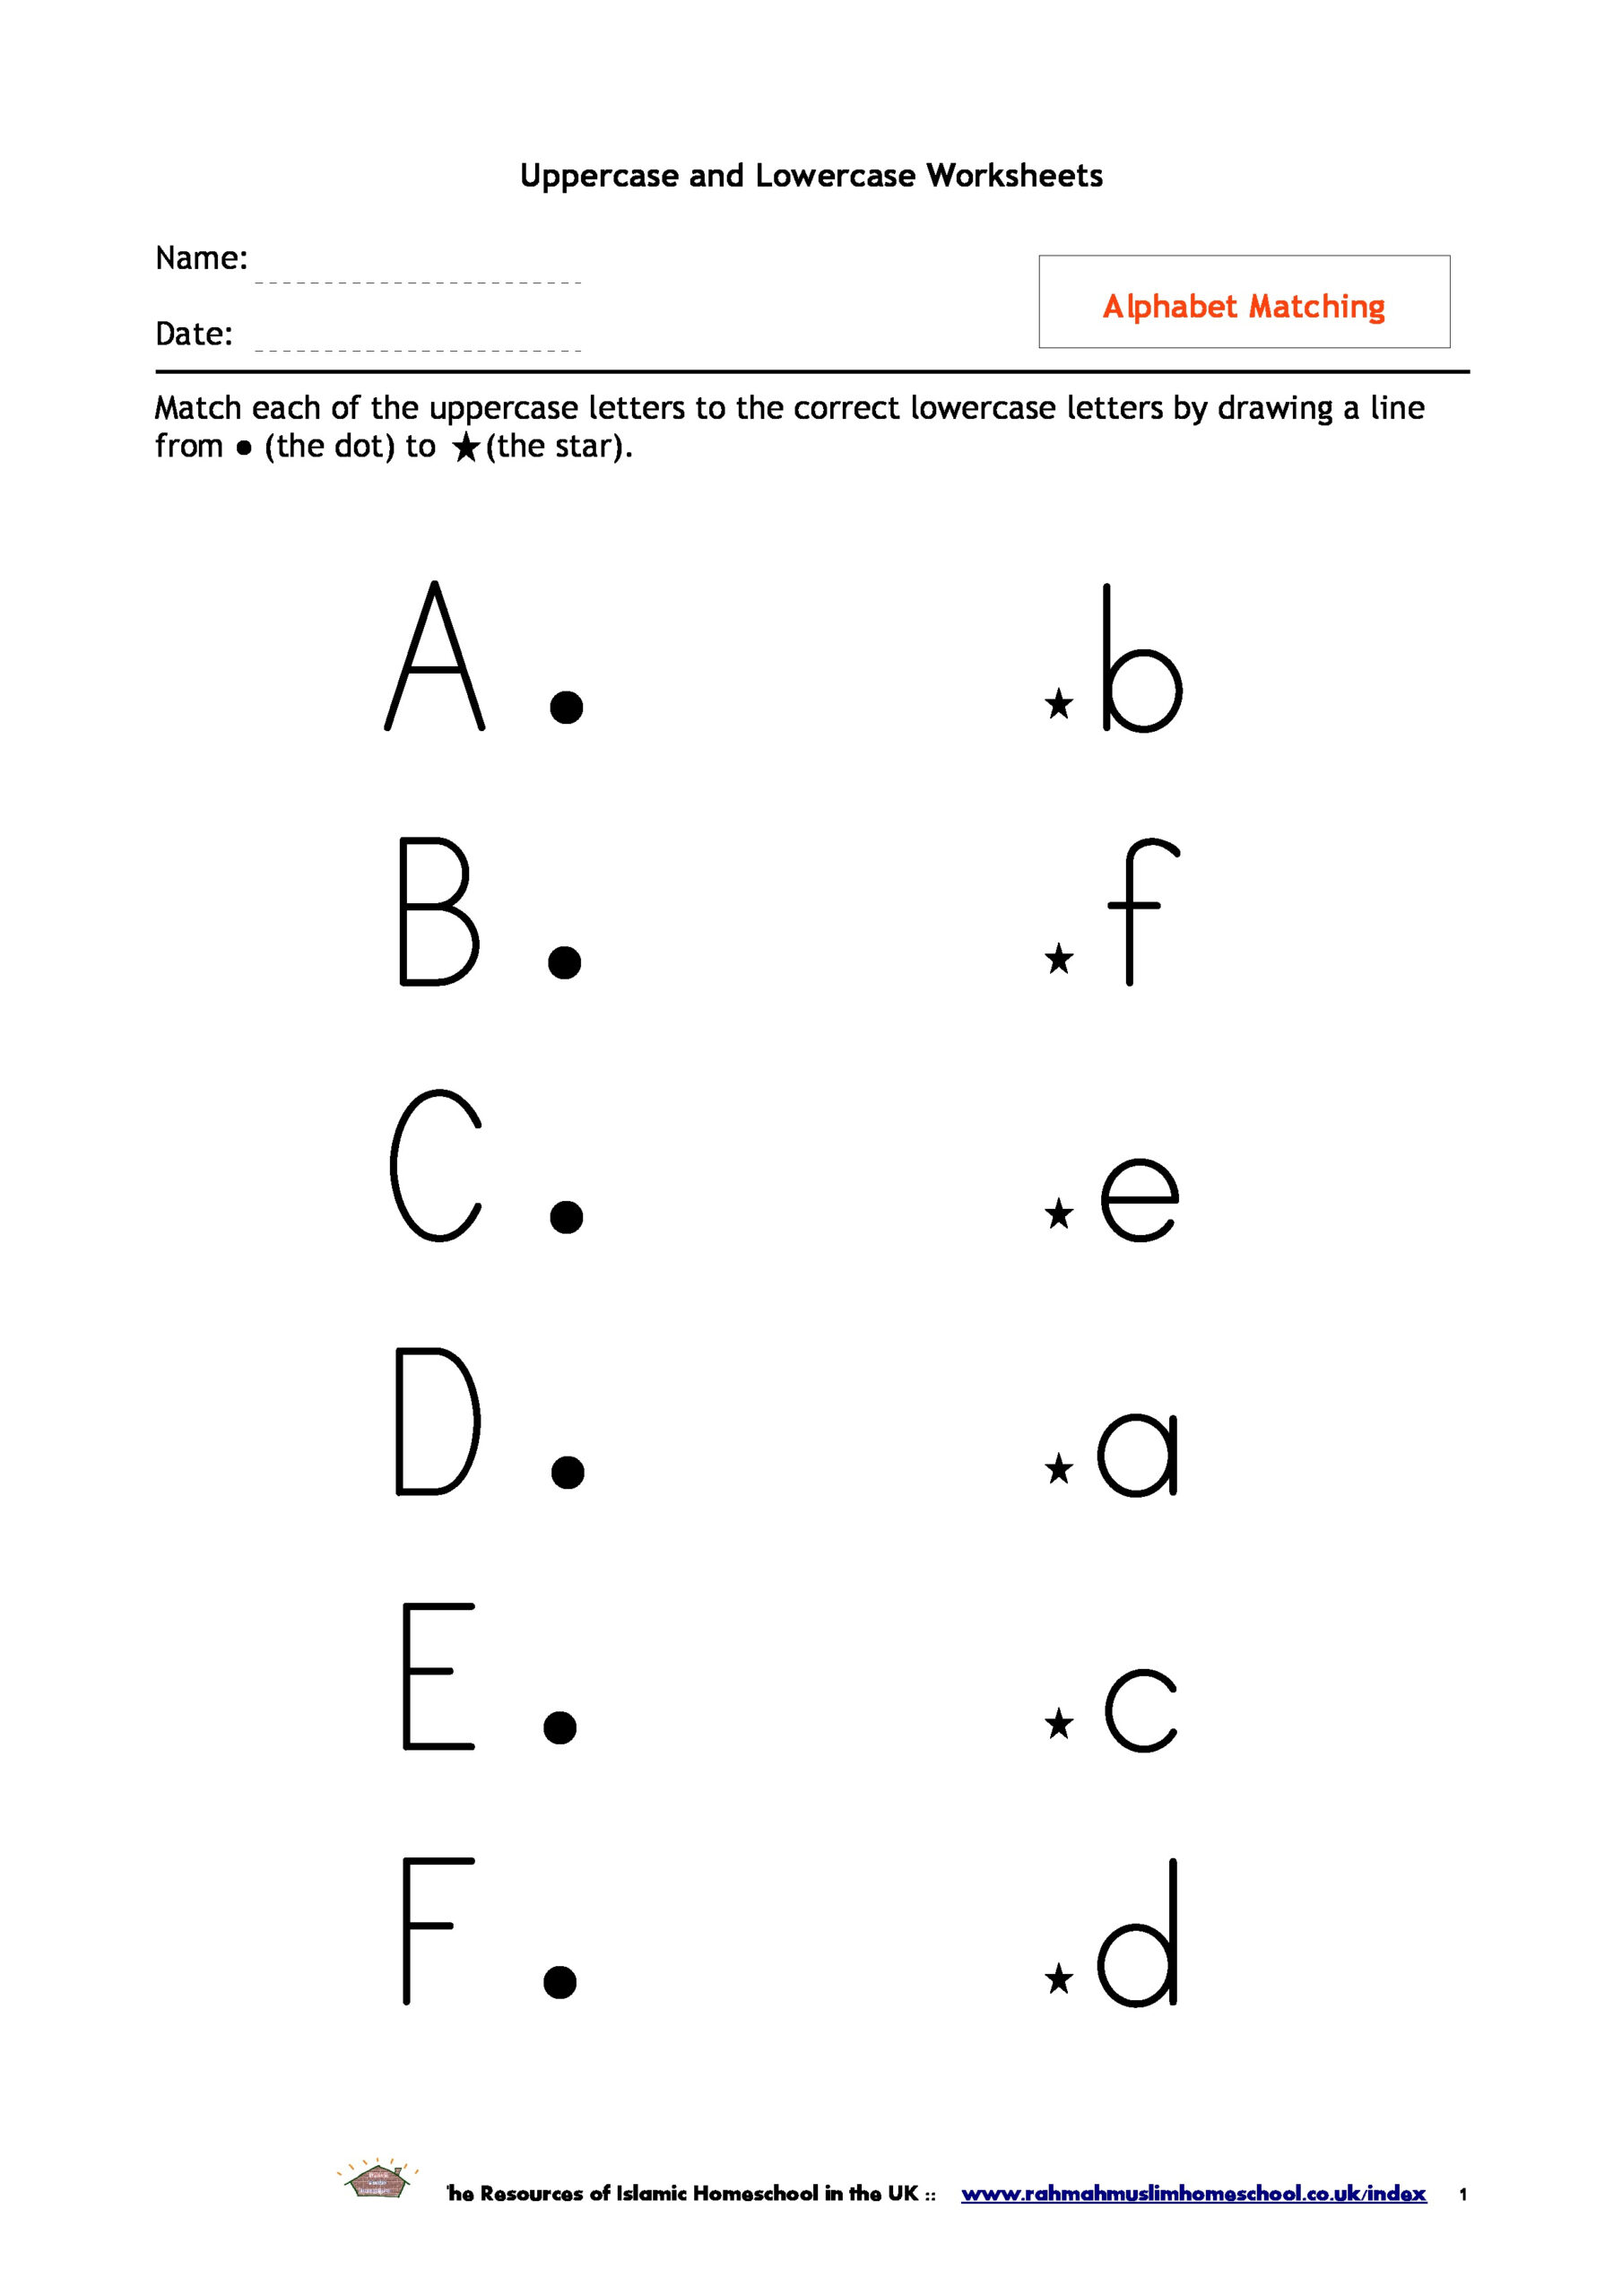 Alphabet Matching Worksheets | The Resources Of Islamic inside Alphabet Matching Worksheets For Nursery